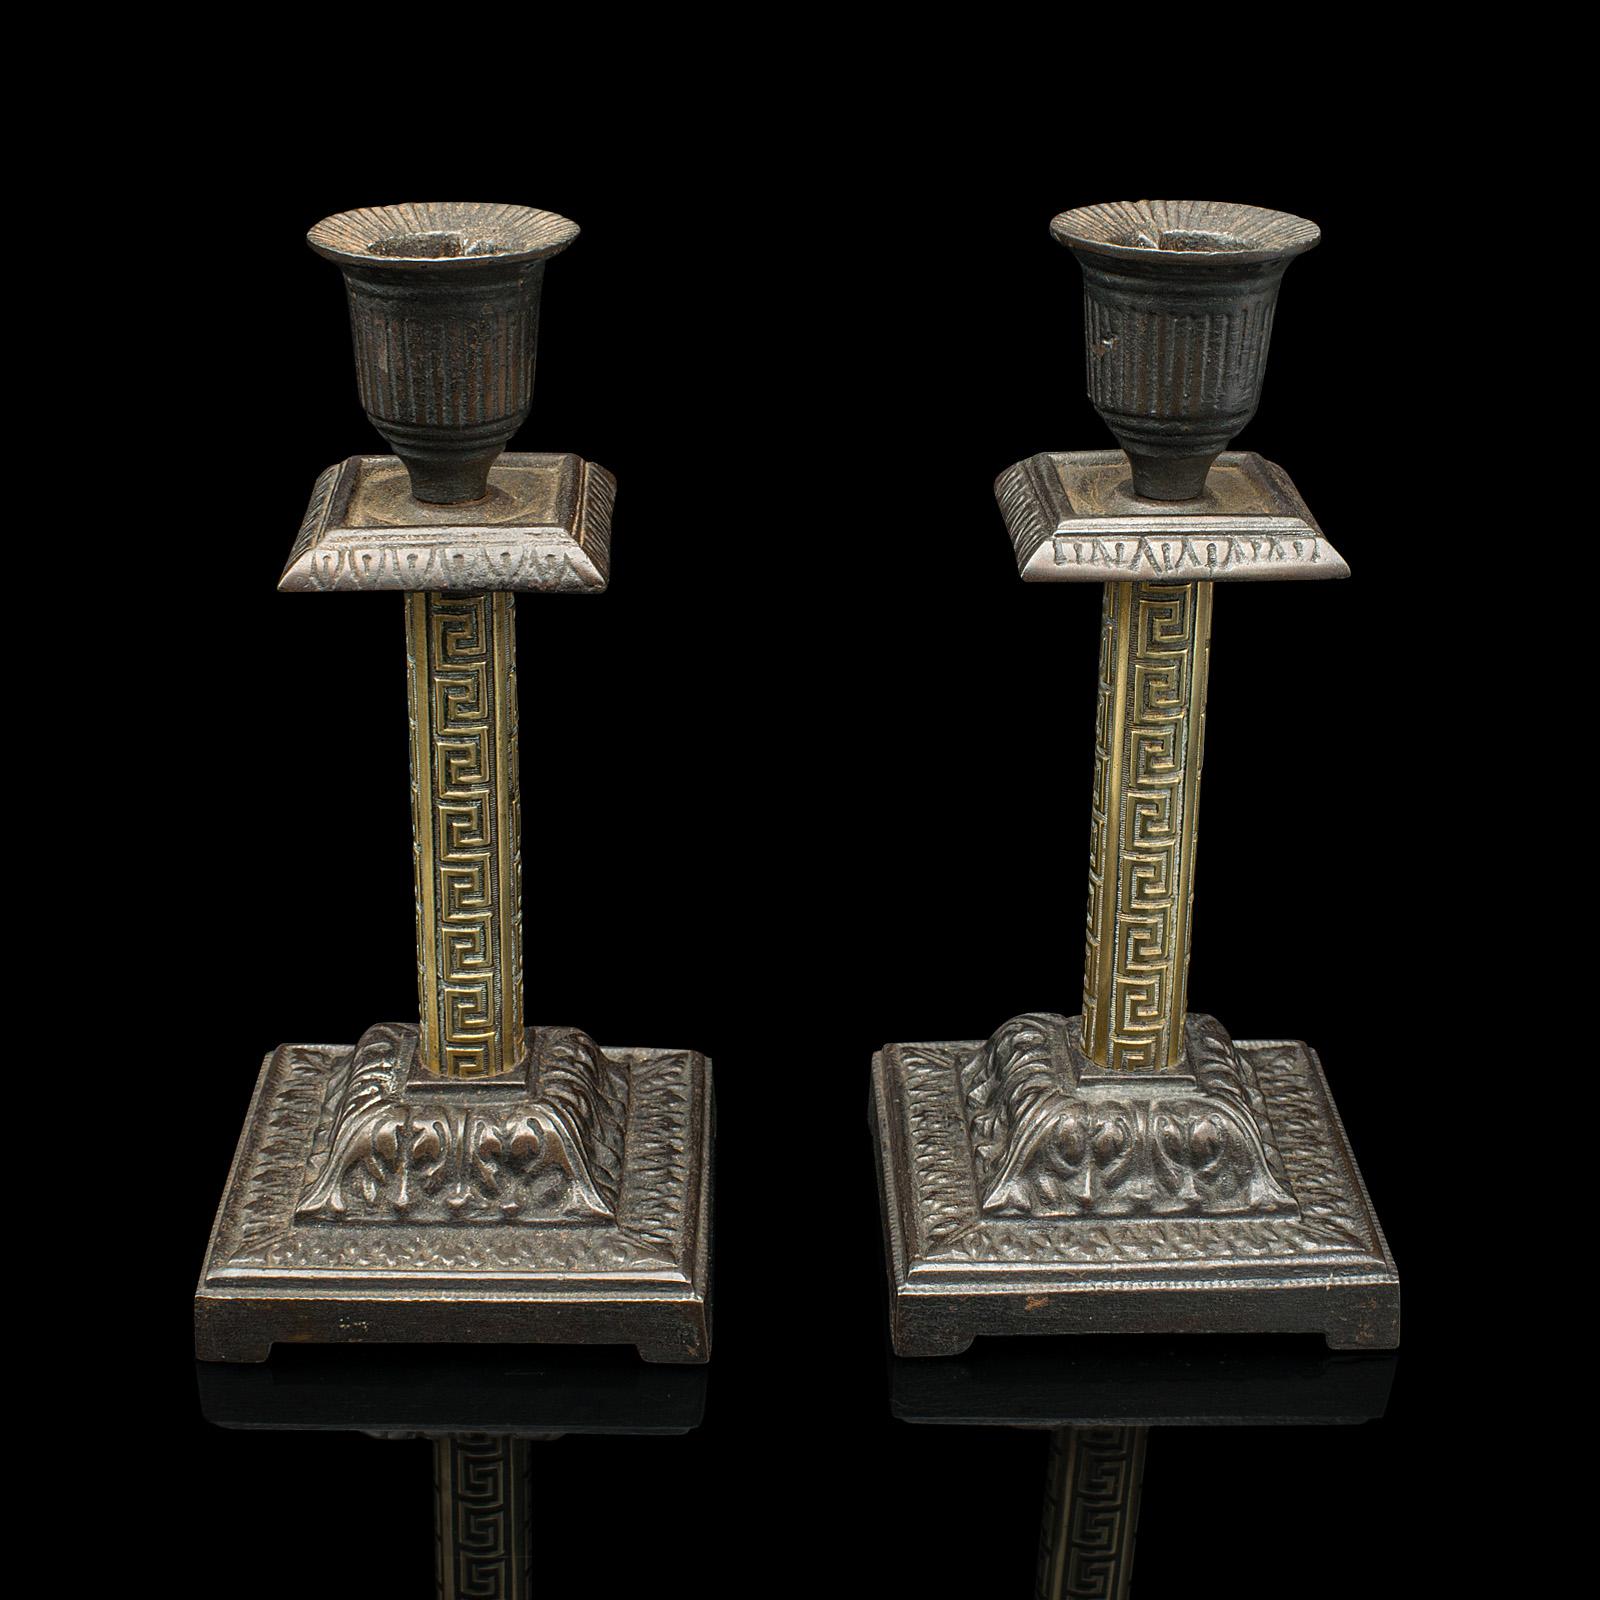 This is a small pair of Aesthetic Period candlesticks. An English, brass and cast iron candle stand, dating to the late Victorian period, circa 1890.

Petite and tastefully decorative pair, ideal for an intimate evening
Displaying a desirable aged